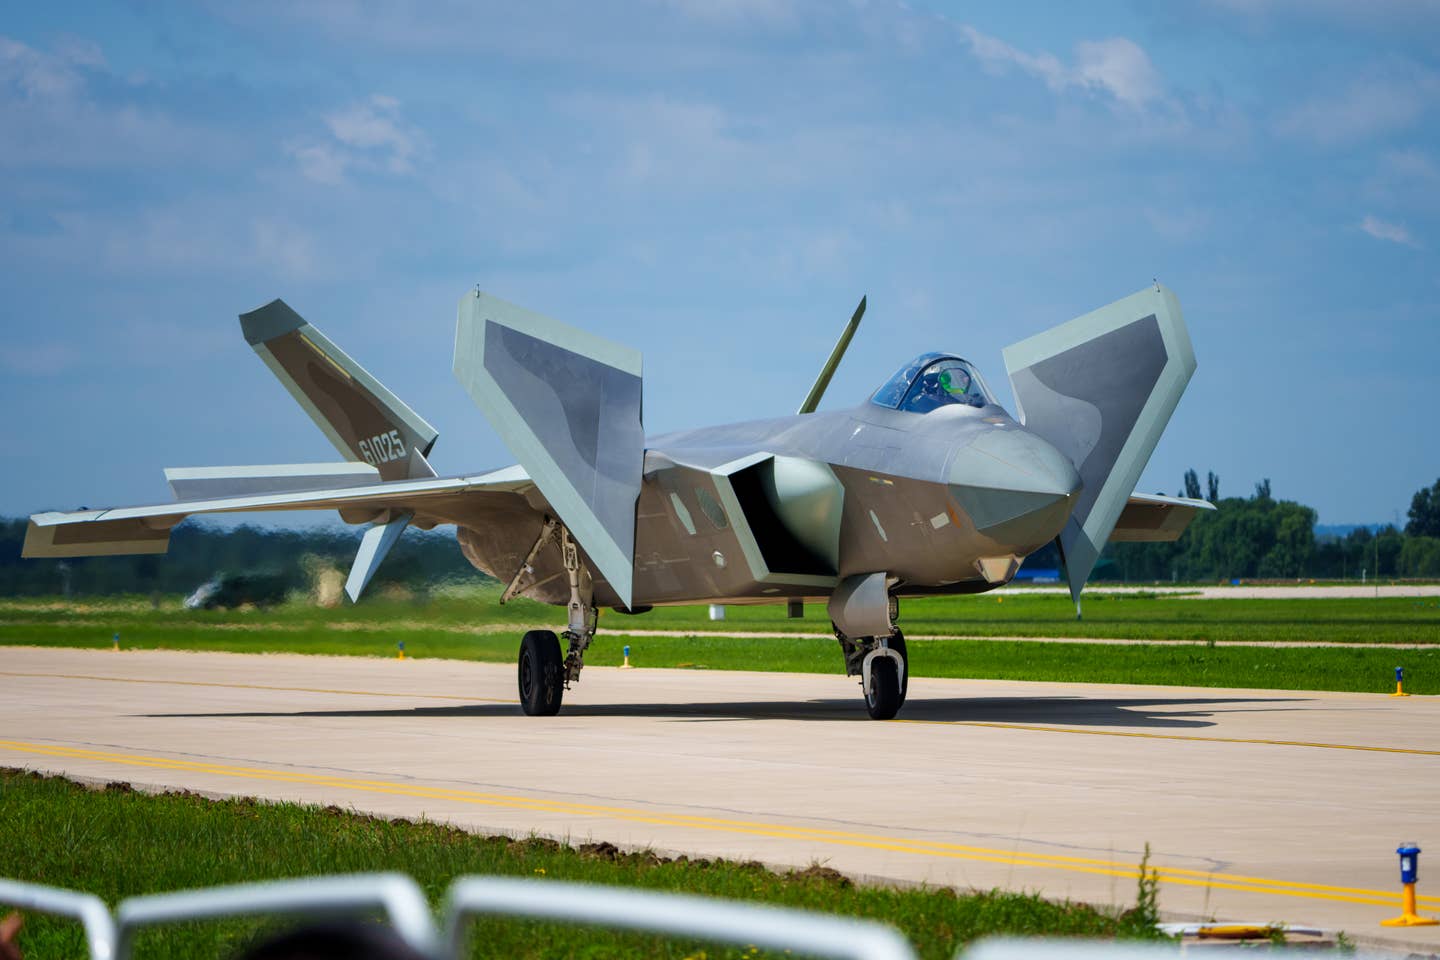 A J-20 stealth fighter rehearses for the 2023 Changchun Air Show in July 2023 in Changchun, Jilin Province of China. <em>Photo by Wang Jingtian/VCG via Getty Images</em>